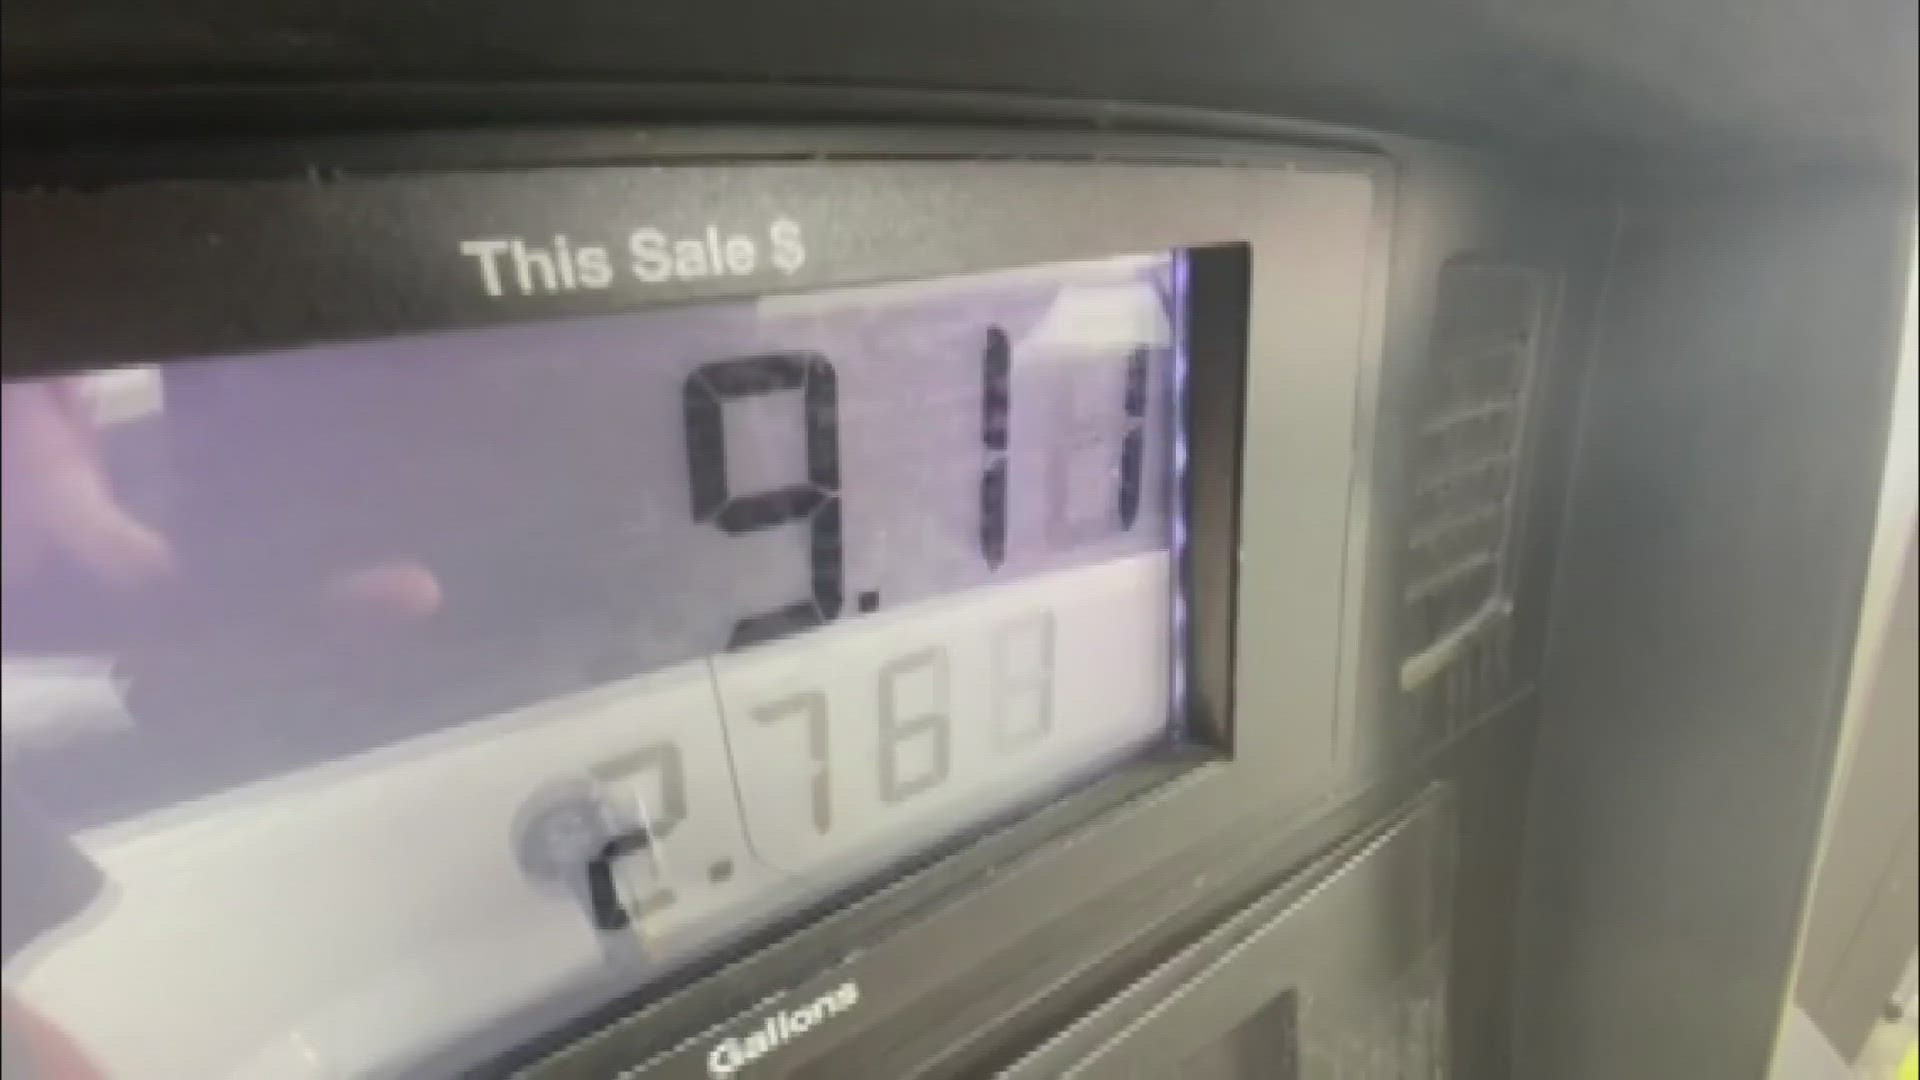 The current average price in Knox County is $3.19 a gallon.